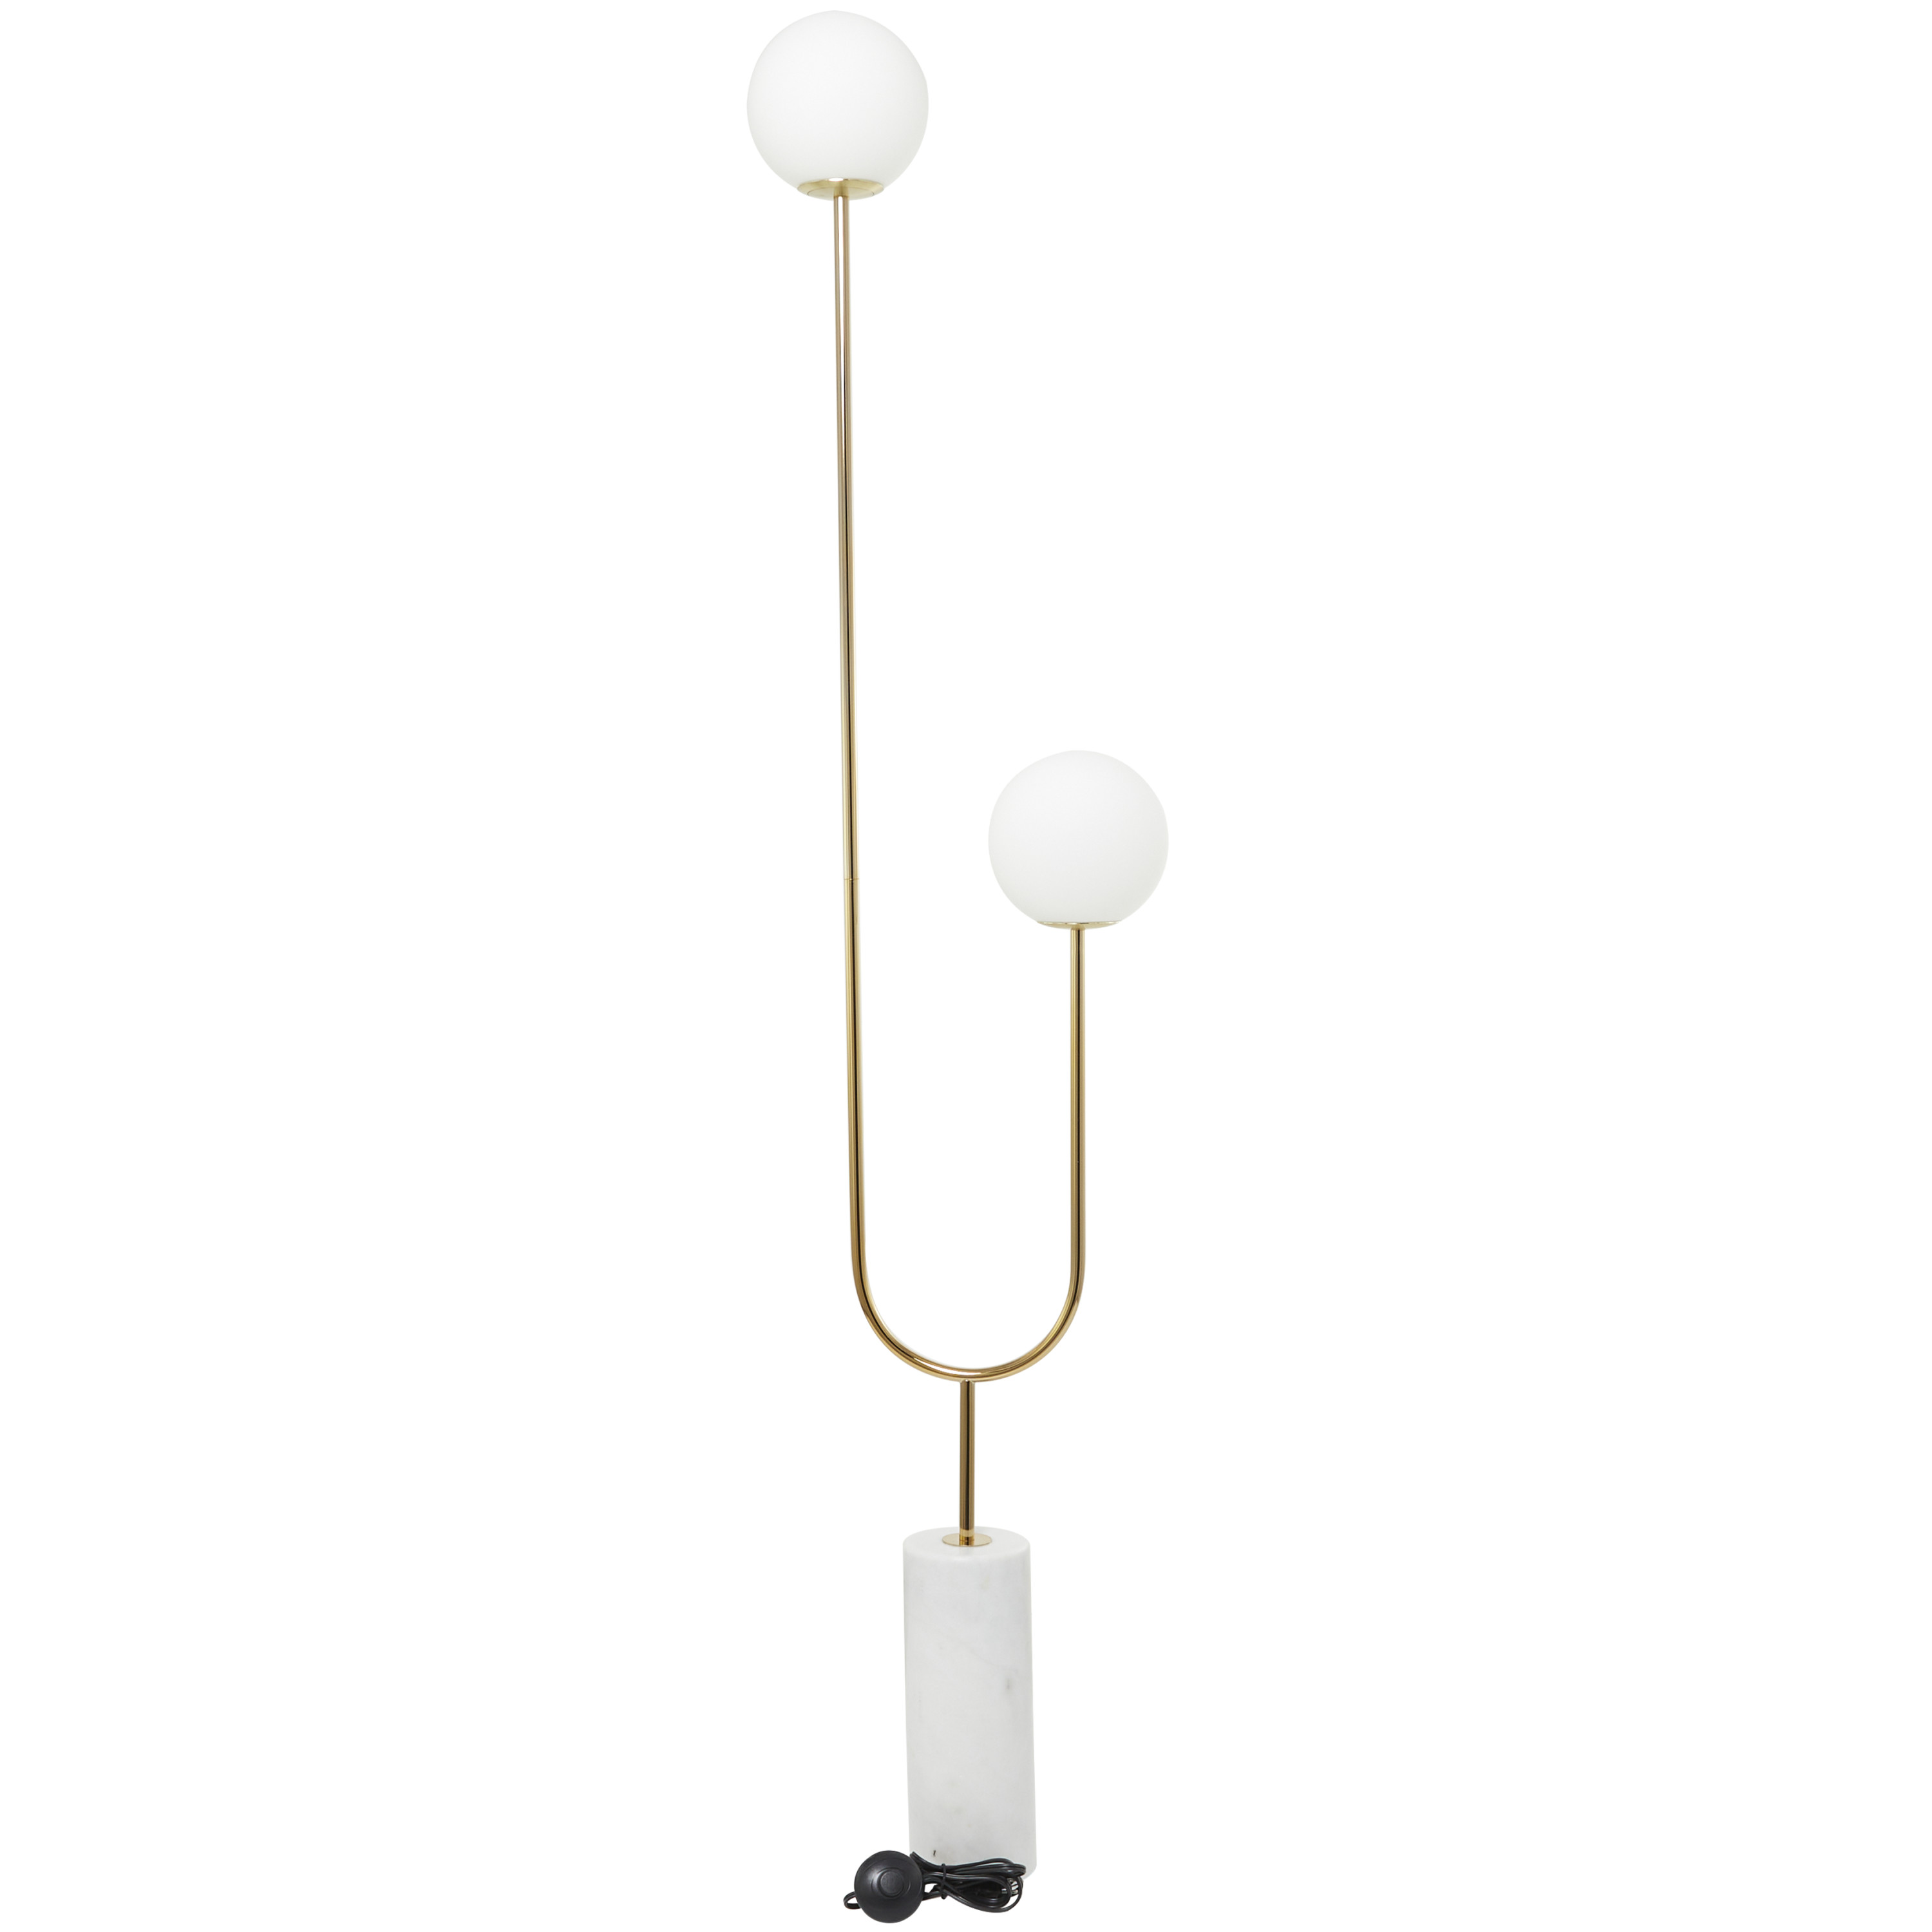 DecMode 73" 2 Light Orb Gold Floor Lamp with White Glass Shade - image 8 of 9